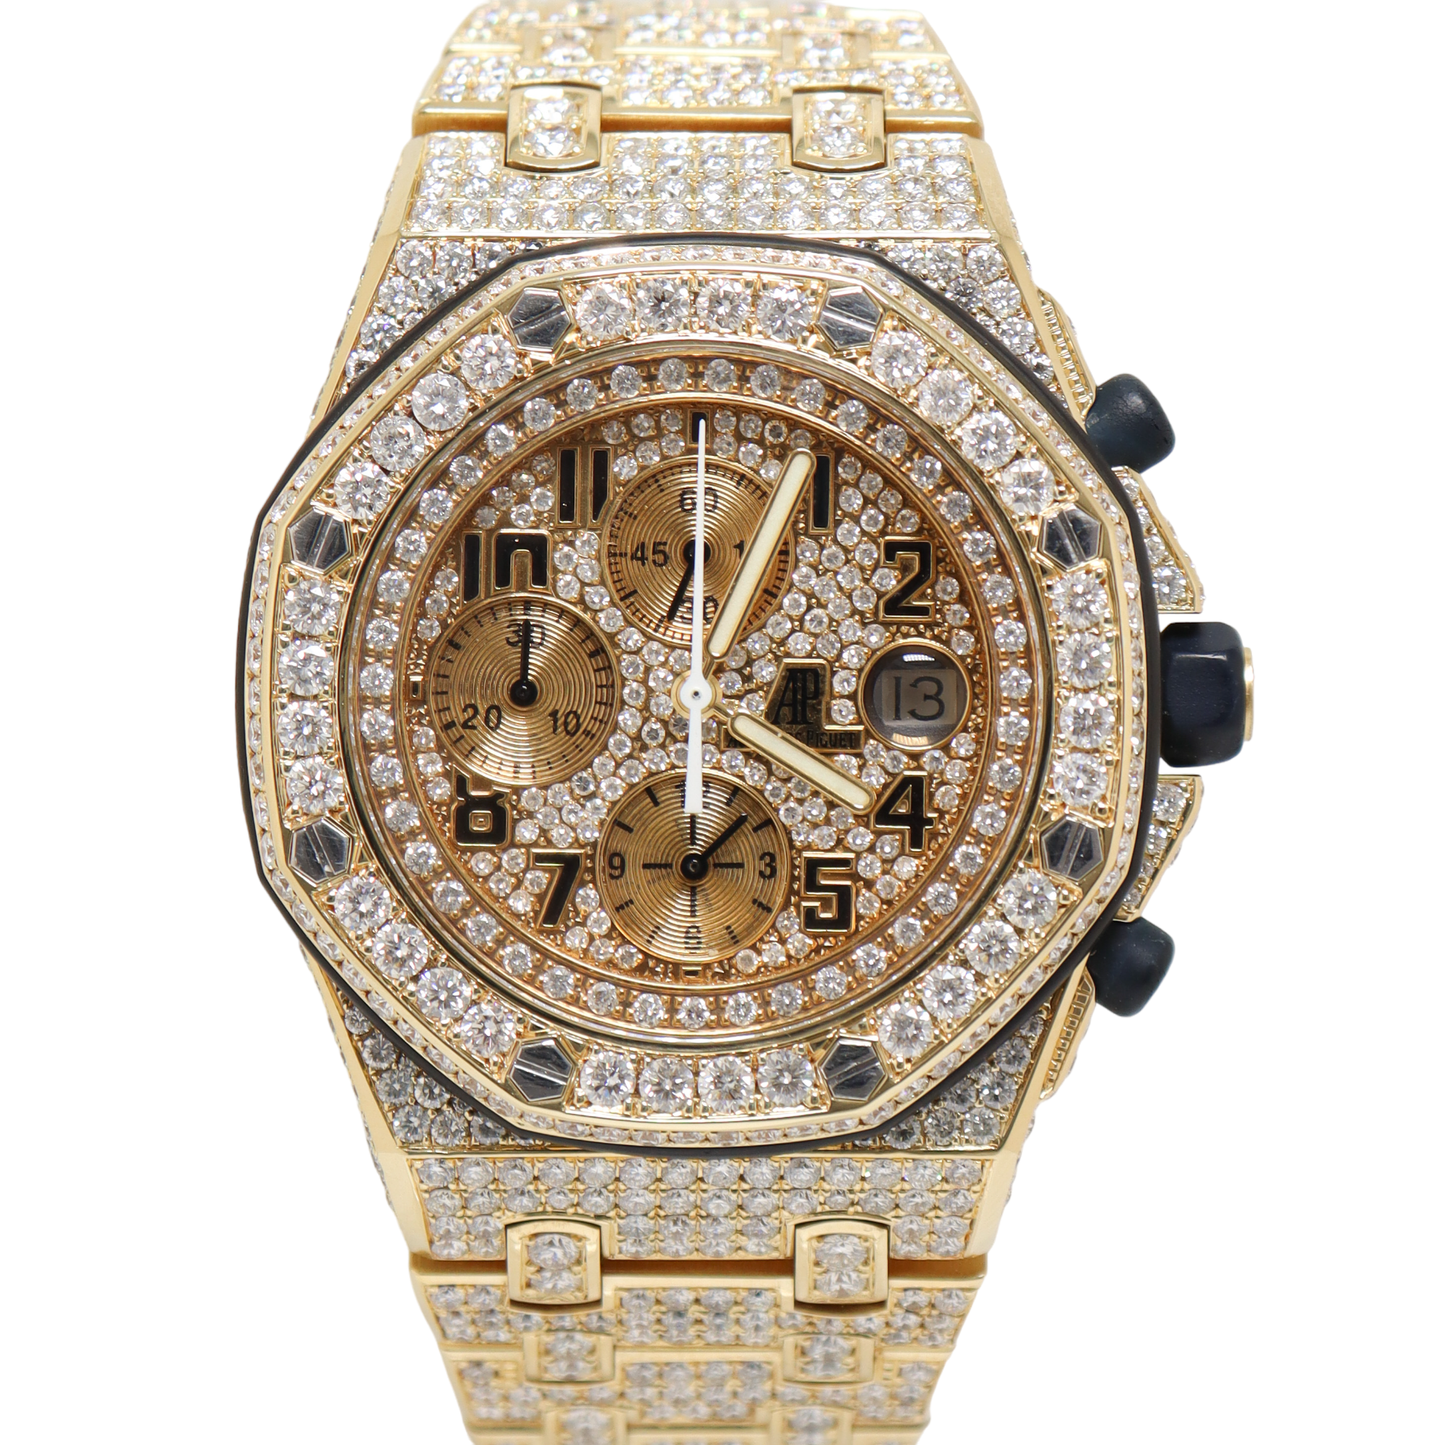 Audemars Piguet Royal Oak Offshore Yellow Gold 42mm Completely Iced Out Pave Chronograph Dial Watch Reference#: 25721BA.OO.1000BA.03 - Happy Jewelers Fine Jewelry Lifetime Warranty